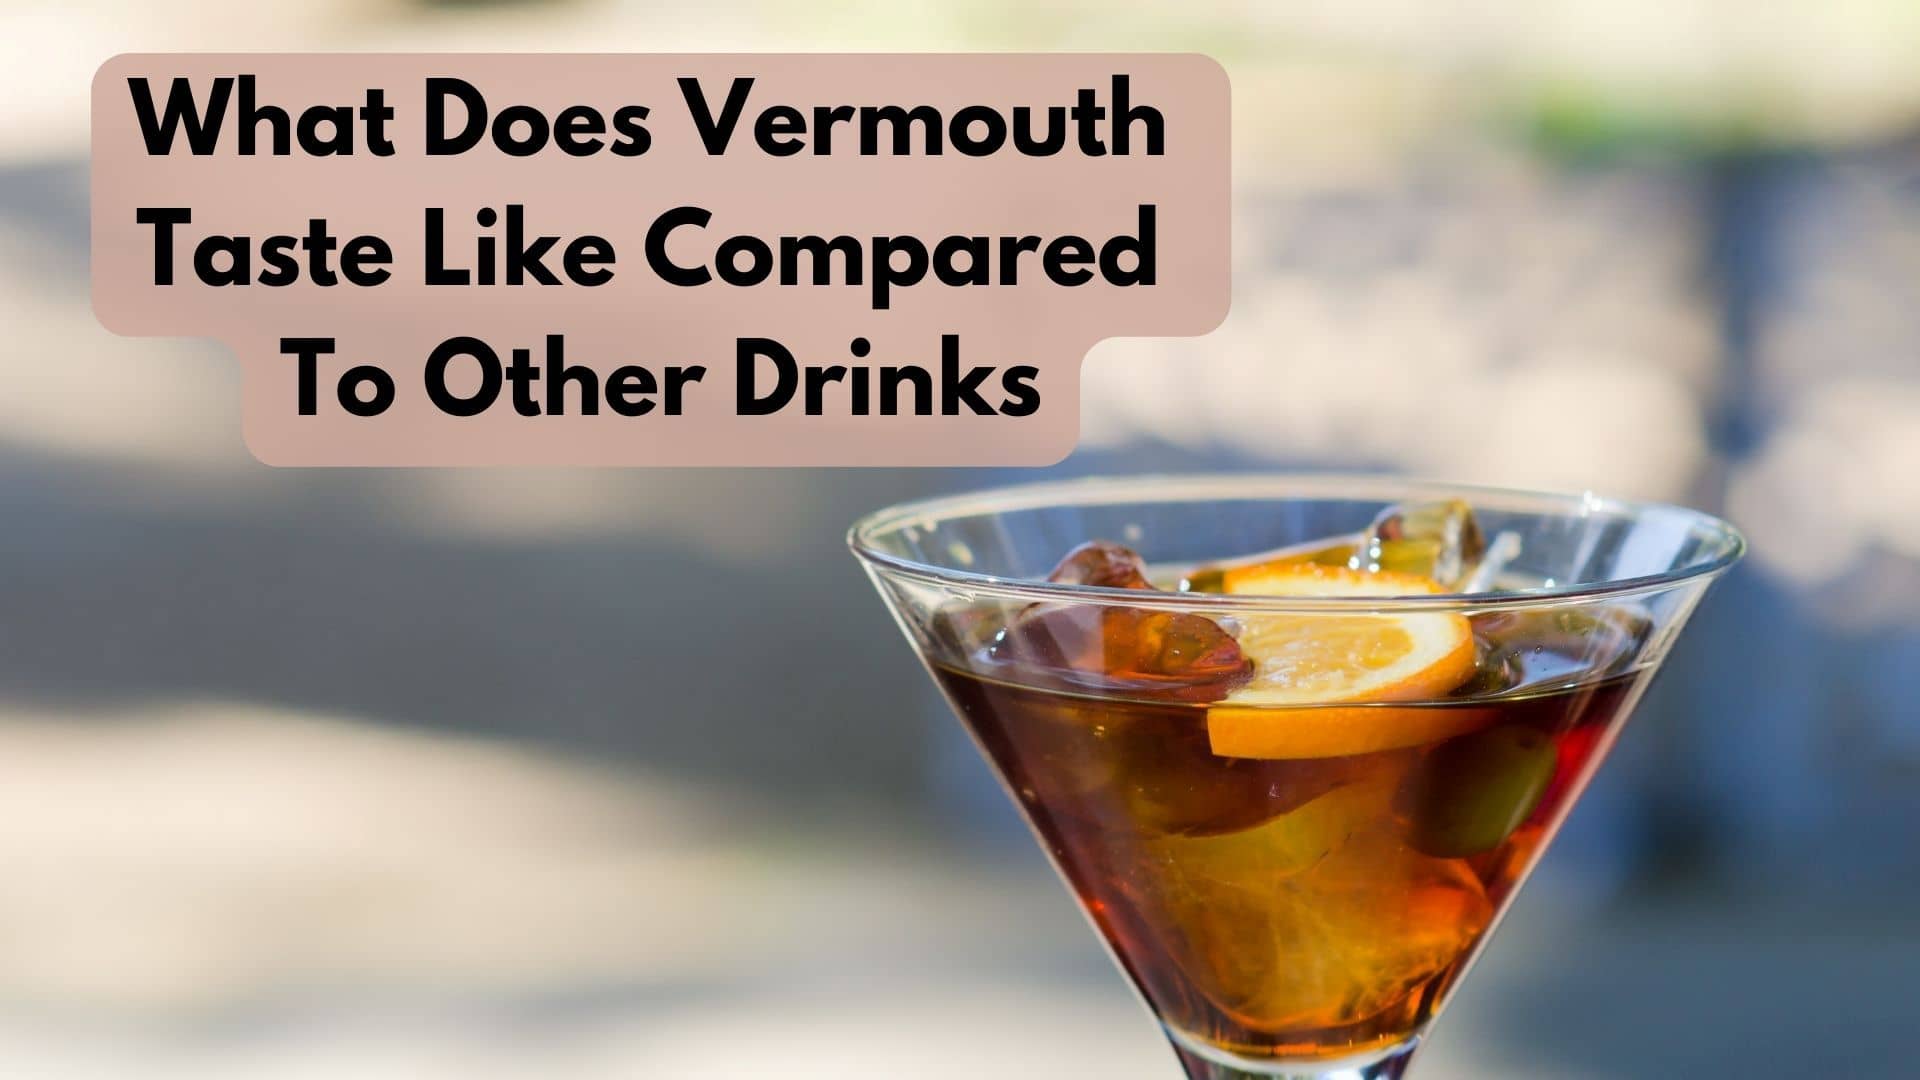 What Does Vermouth Taste Like Compared To Other Drinks